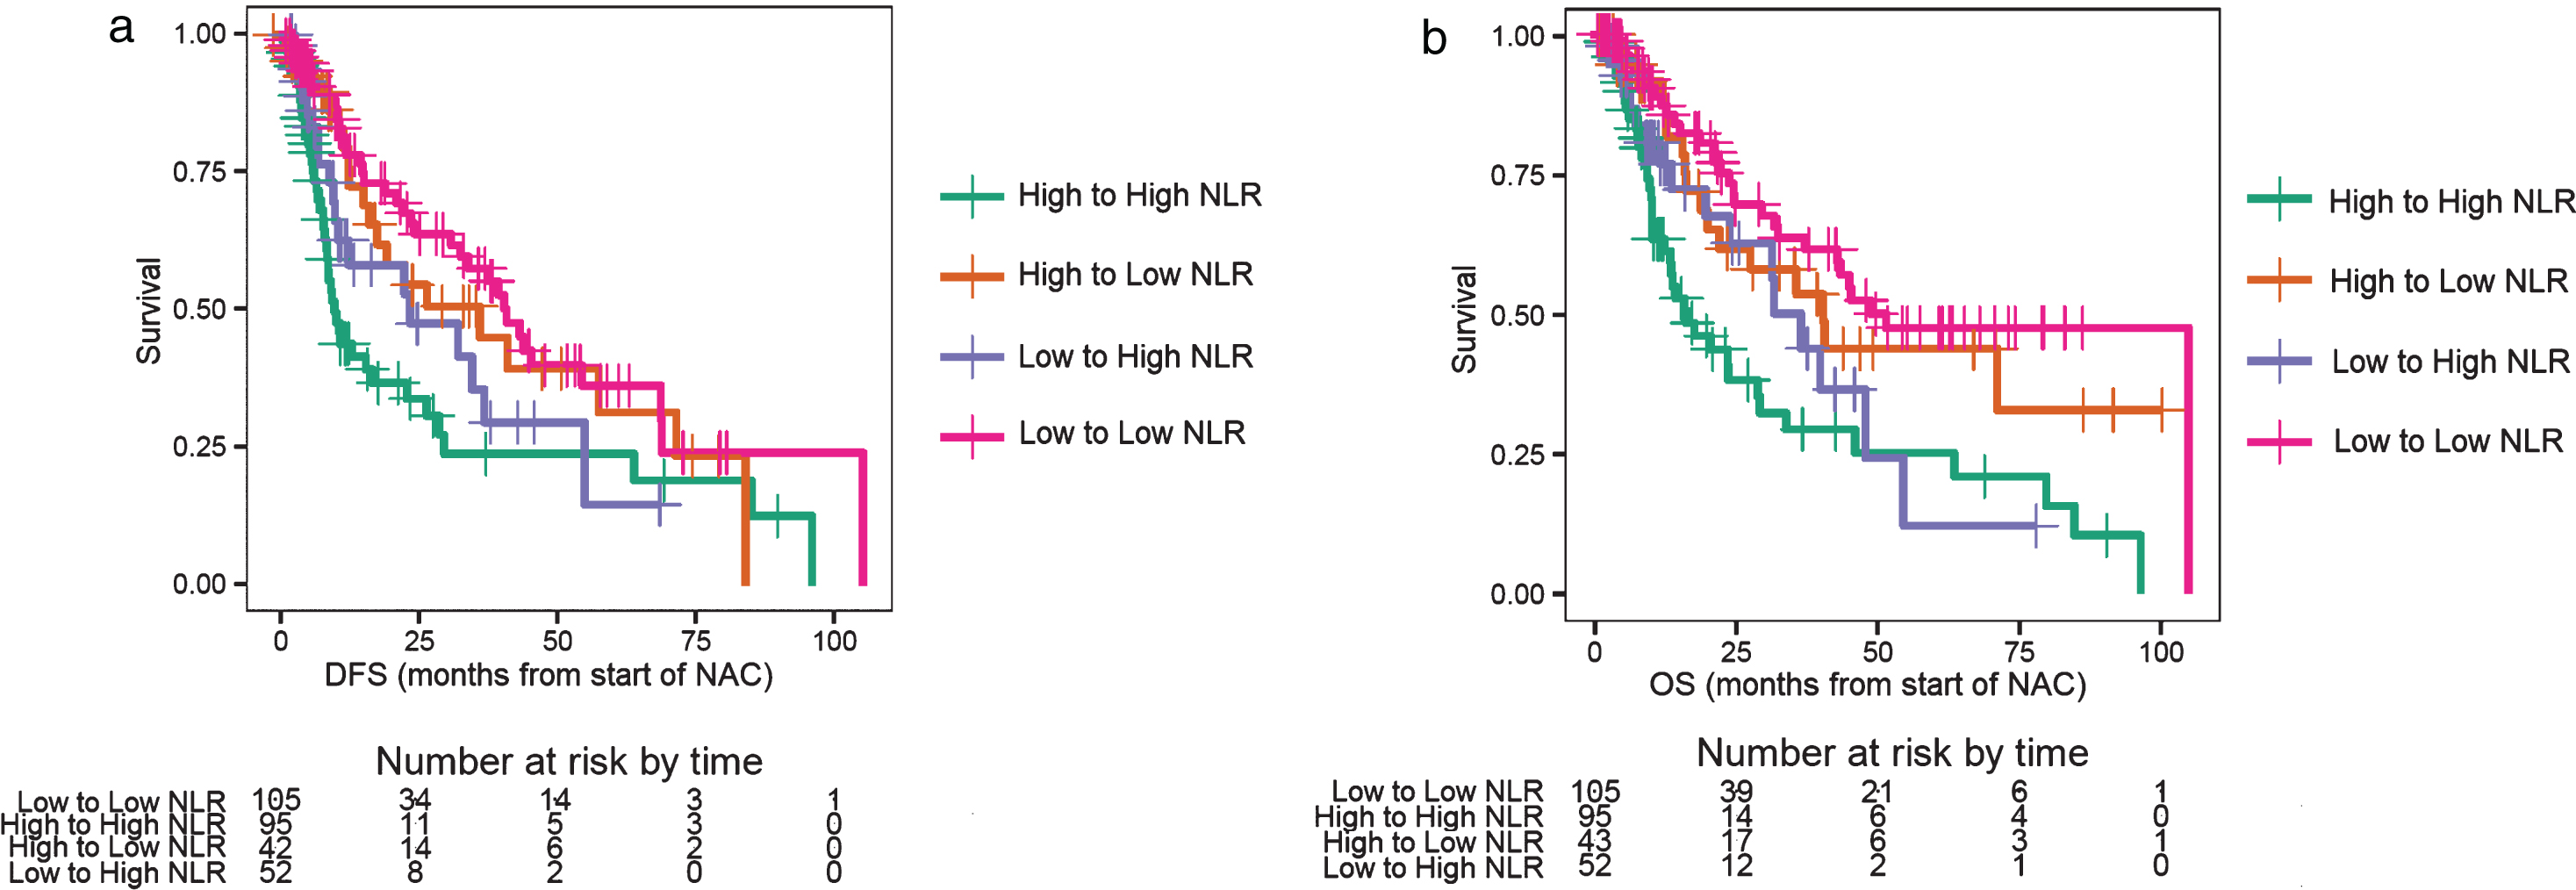 a. Disease-free survival (DFS) for changes in the neutrophil-to-lymphocyte ratio (NLR). b. Overall survival (OS) for changes in the neutrophil-to-lymphocyte ratio (NLR).